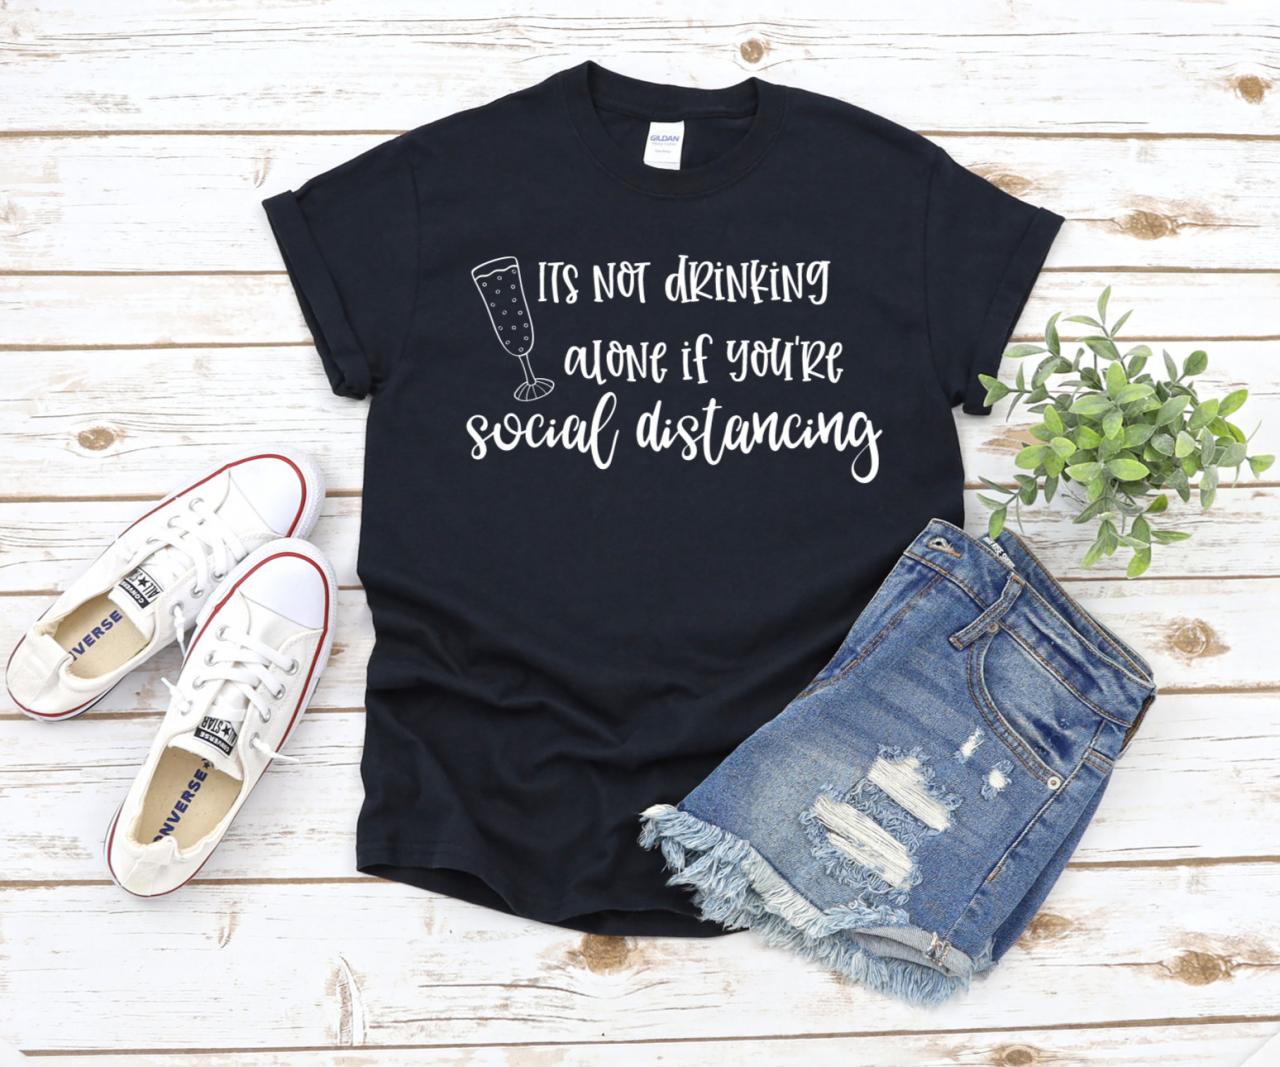 Its Not Drinking Alone If You're Social Distancing Shirt, Social Distance, Quarantine 2020 Shirt, Drinking Shirt, Funny Shirt, Unisex